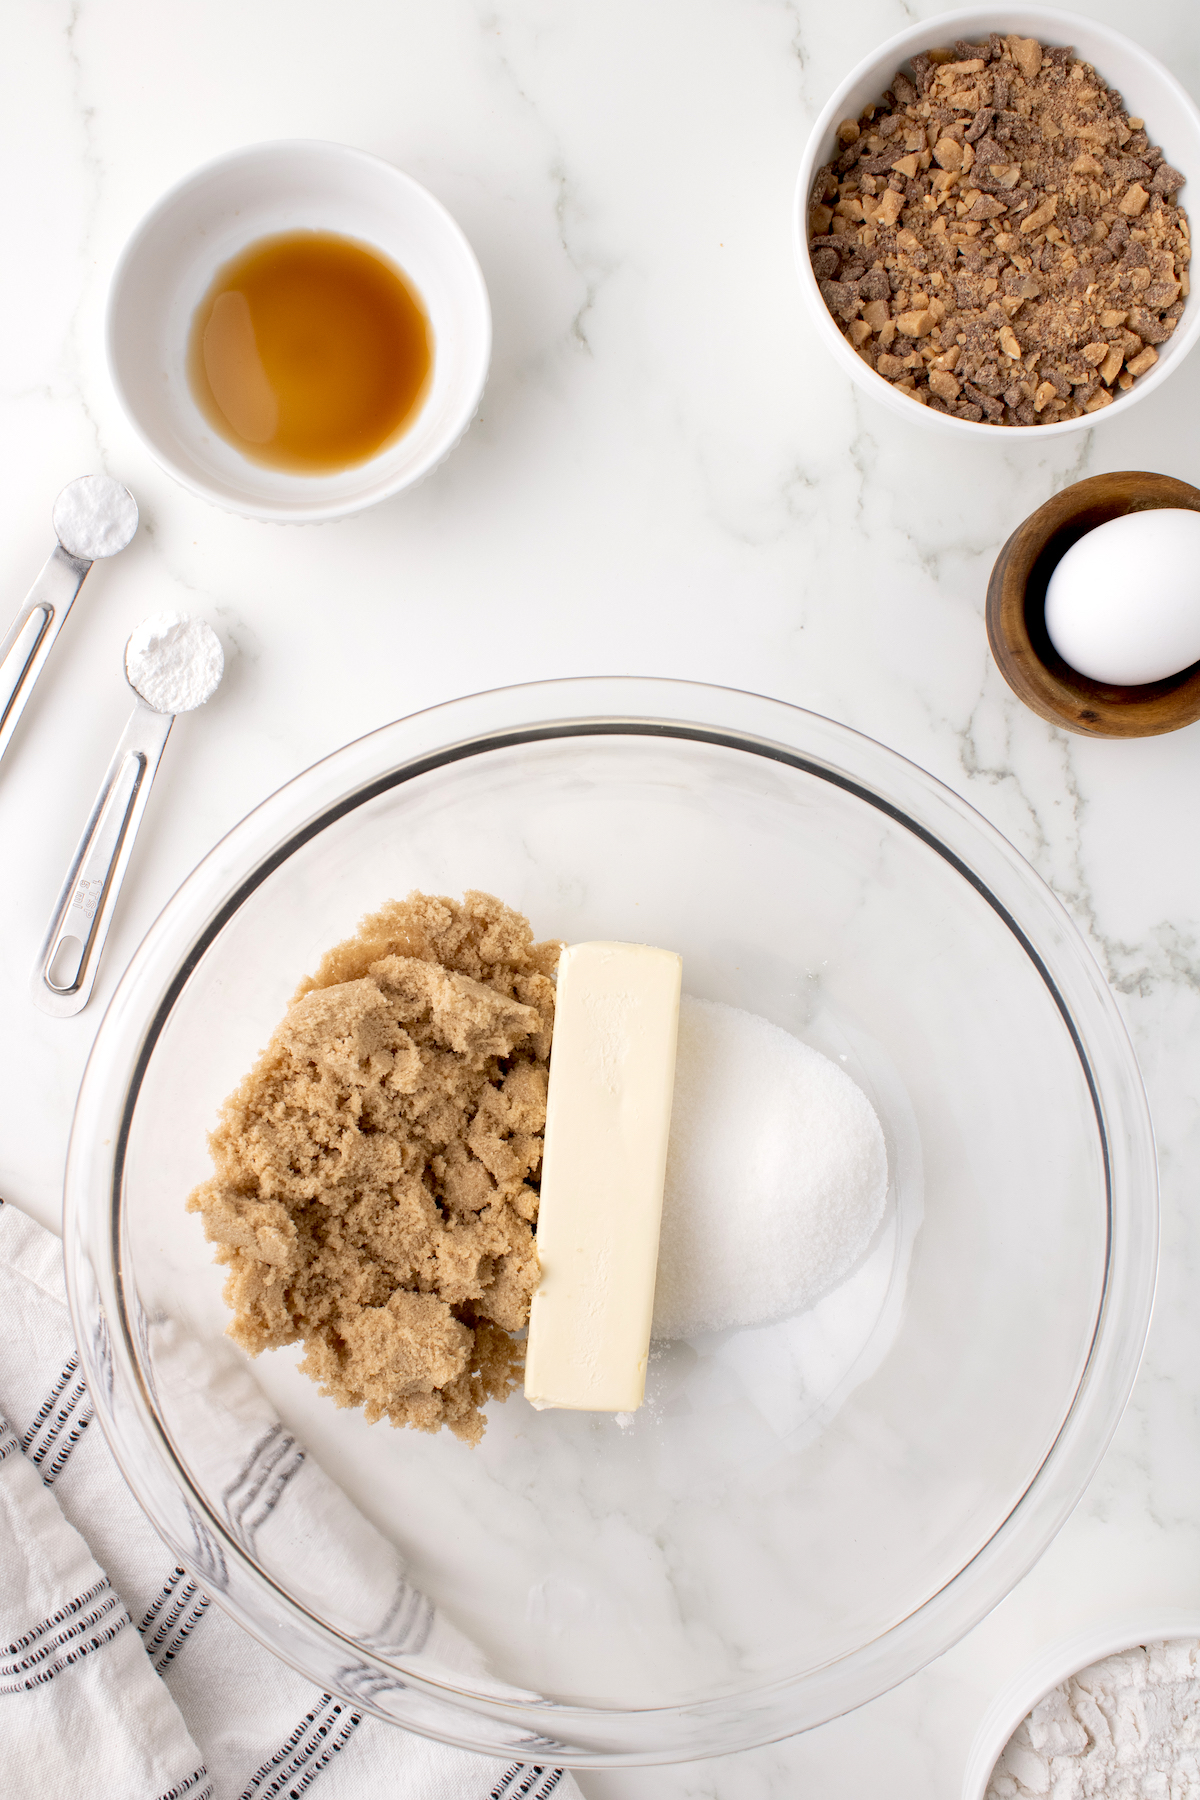 the butter, granulated sugar, and brown sugar together in a clear glass bowl